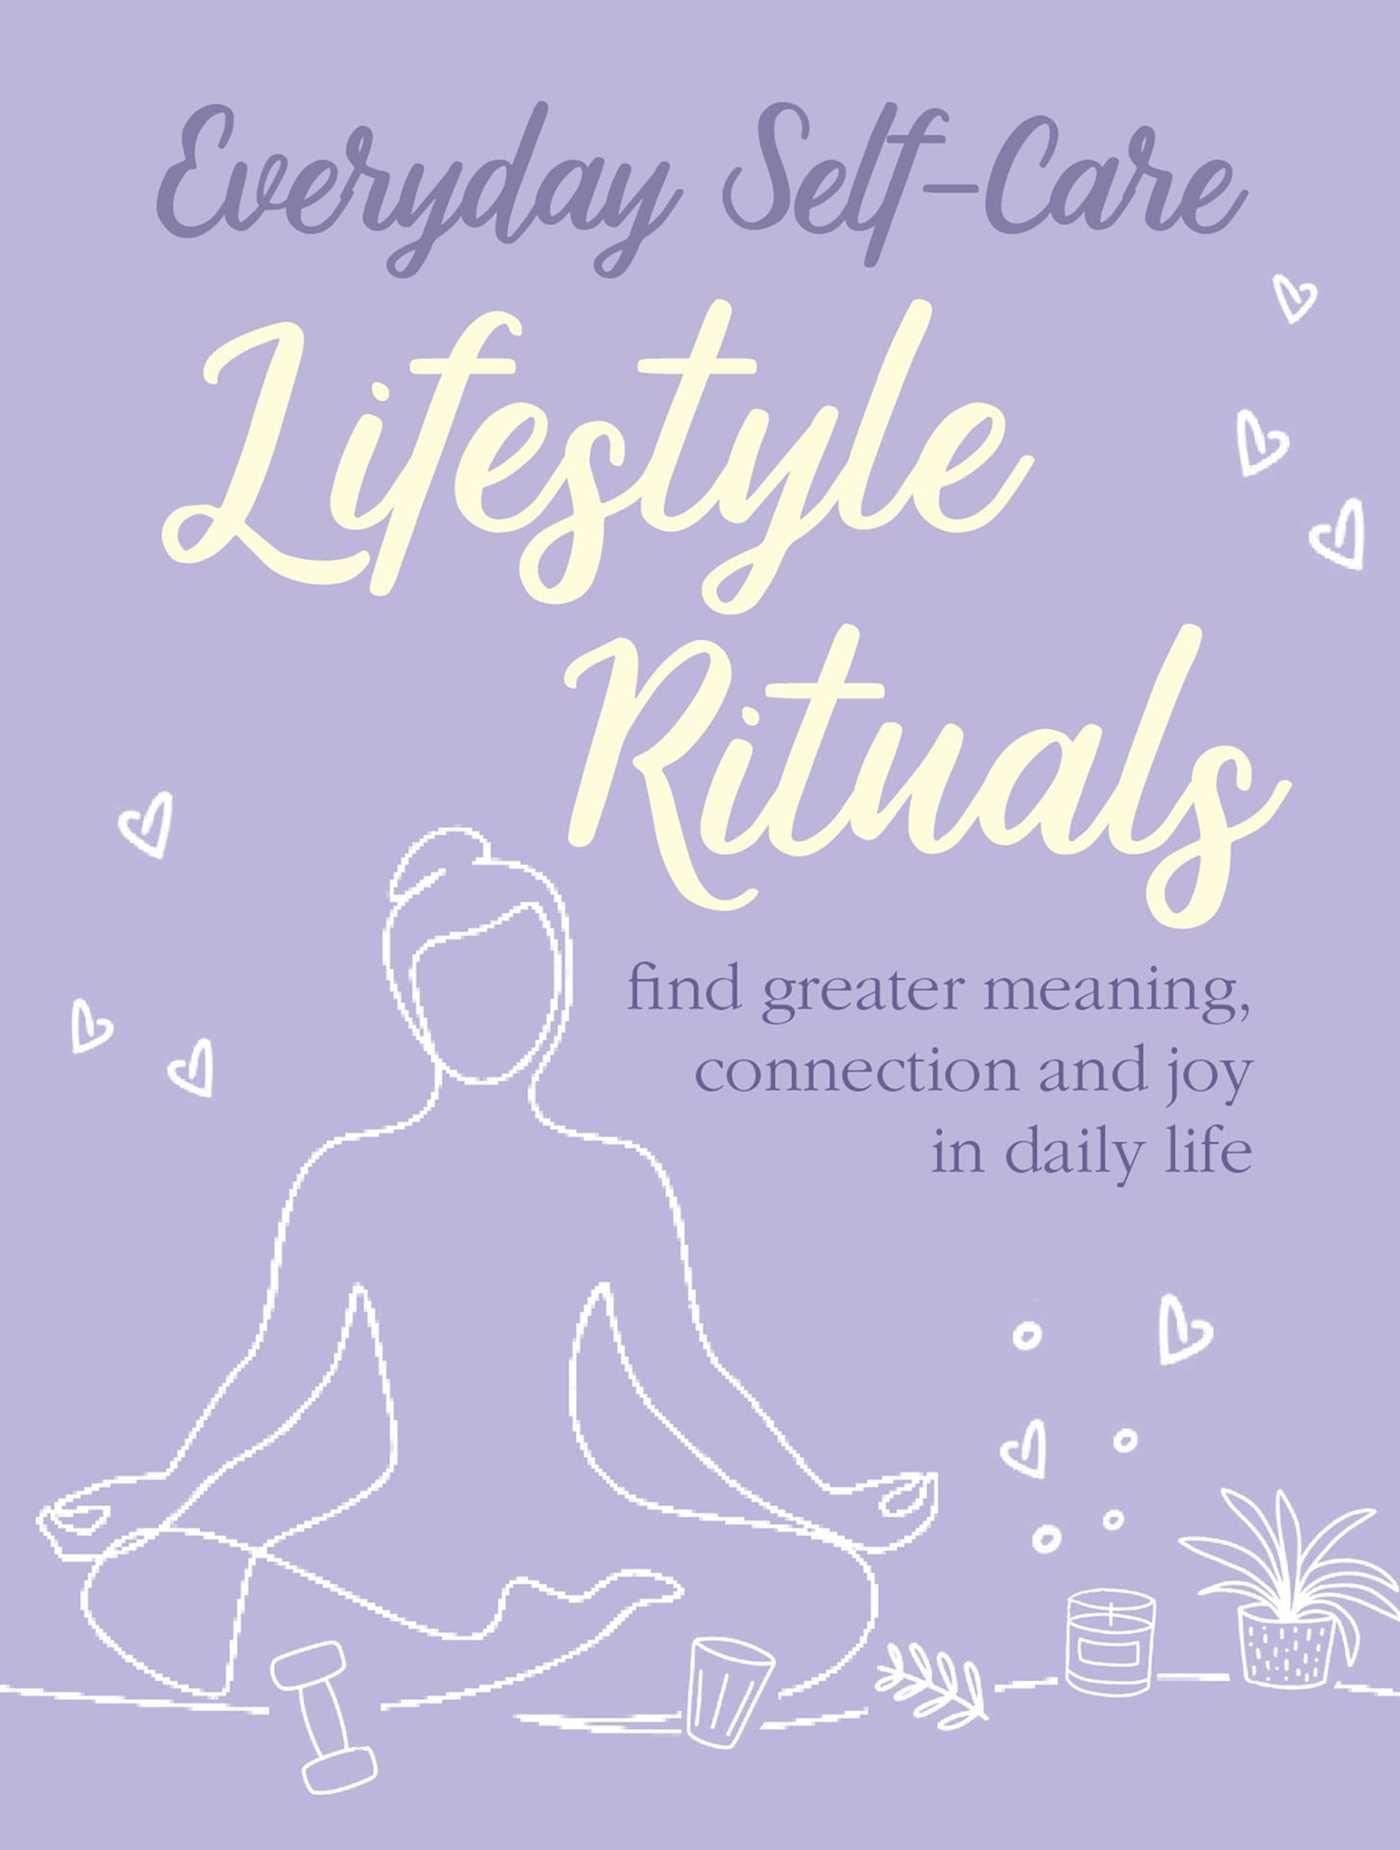 Everyday Self-Care Lifestyle Rituals, bok